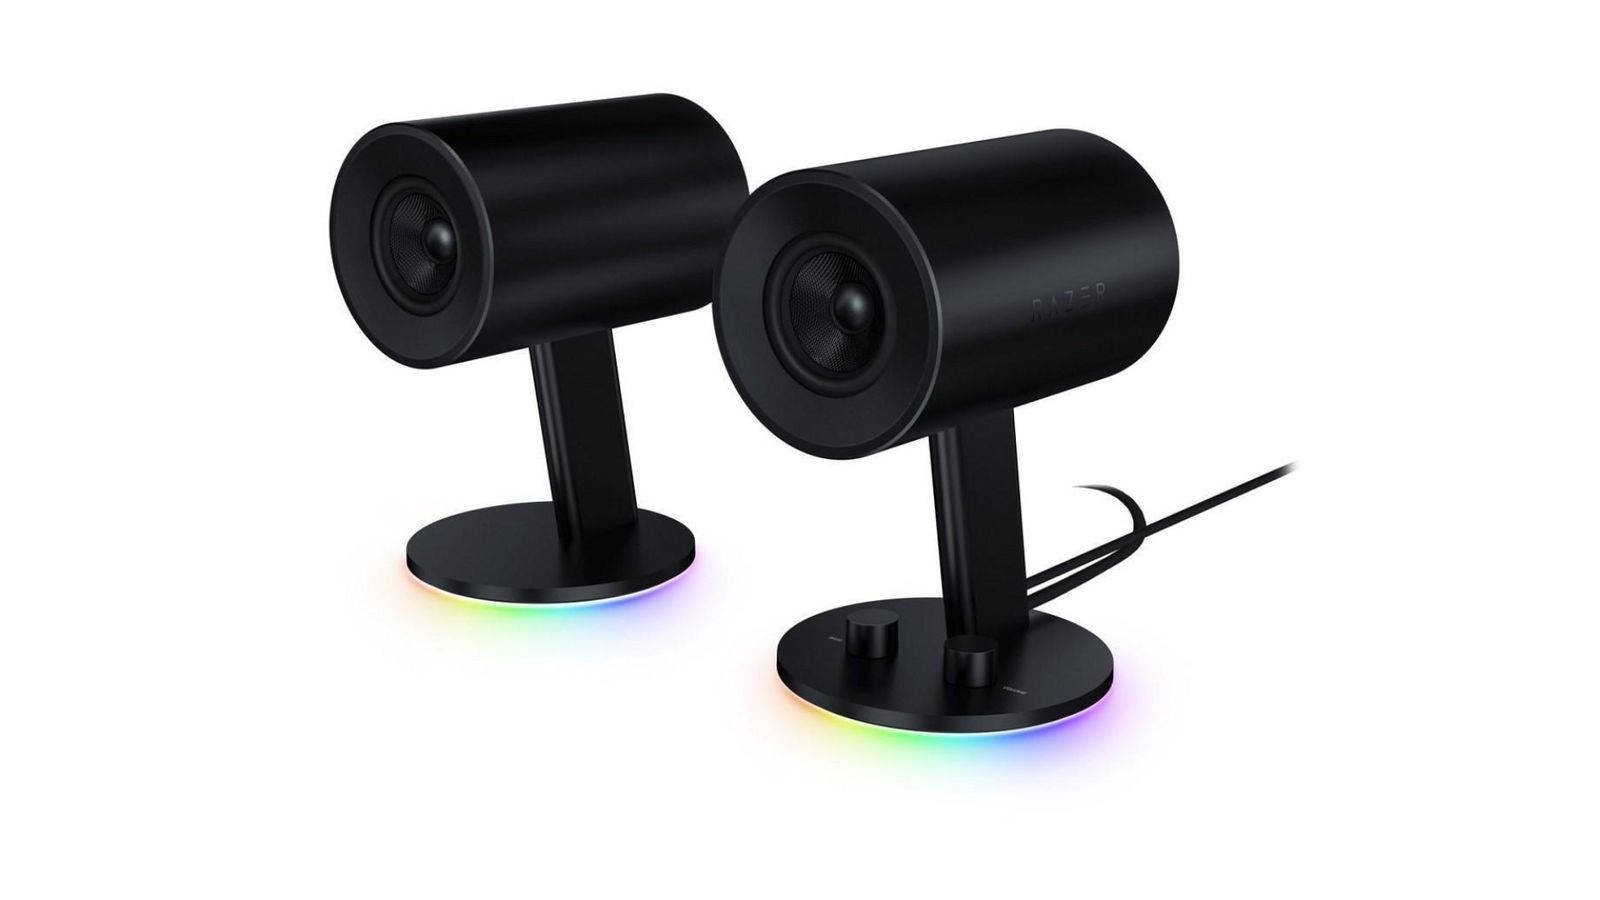 Best gift ideas for racing games - Razer Nommo Chroma 2.0 product image of a pair of black speakers with multi-coloured Chroma lights.